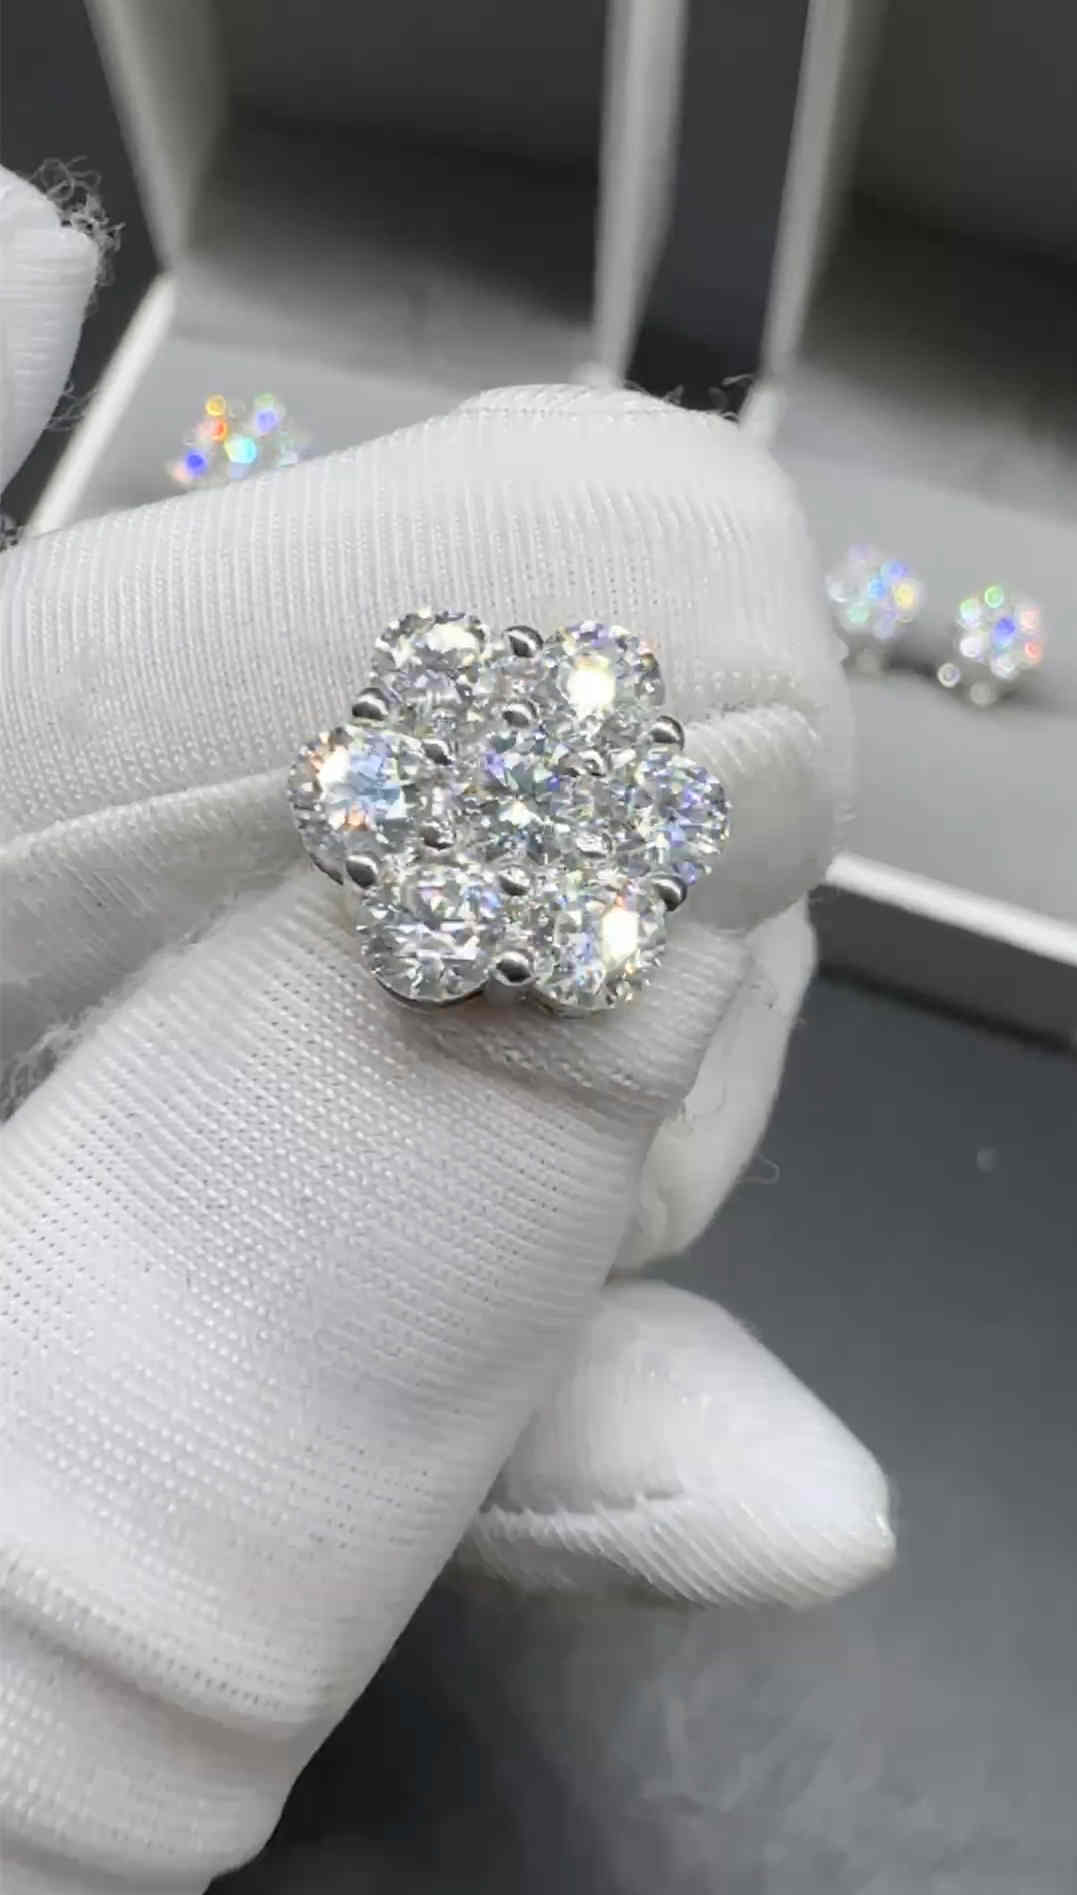 Earrings Moissanite diamonds with 925 silver, can pass diamonds tester 8mm 90$, 12mm A15